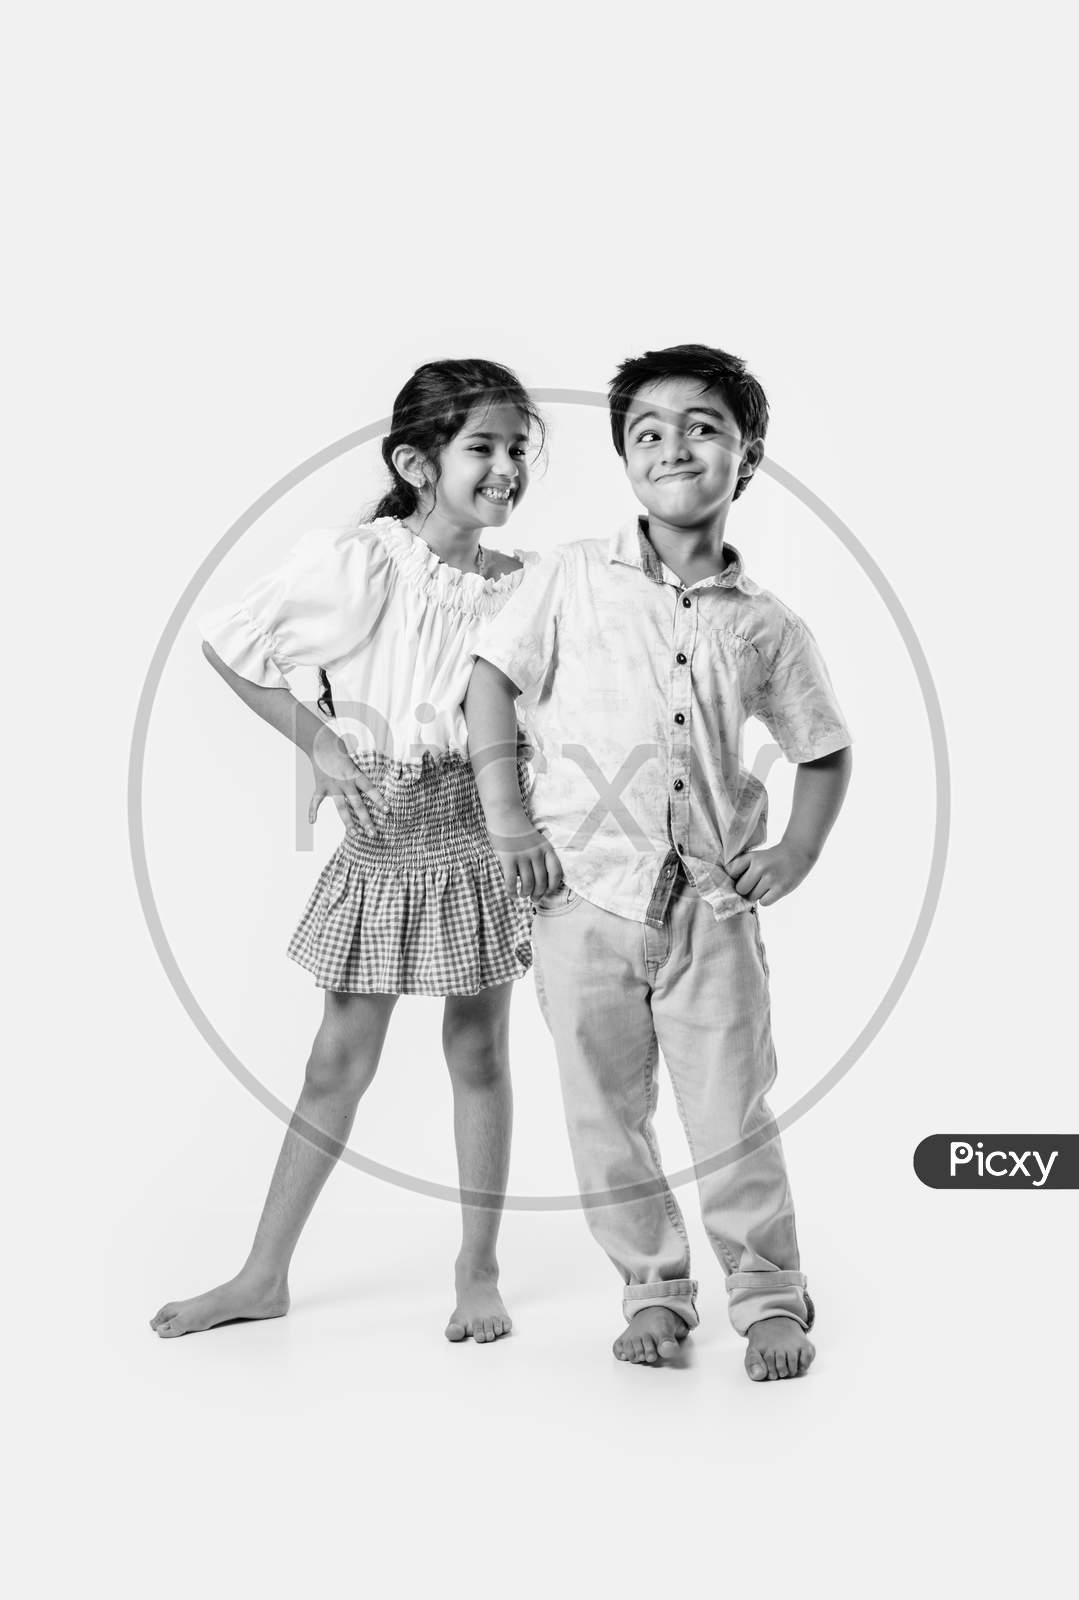 Indian Asian Cute Little Siblings Embracing While Wearing White Cloths Against White Background